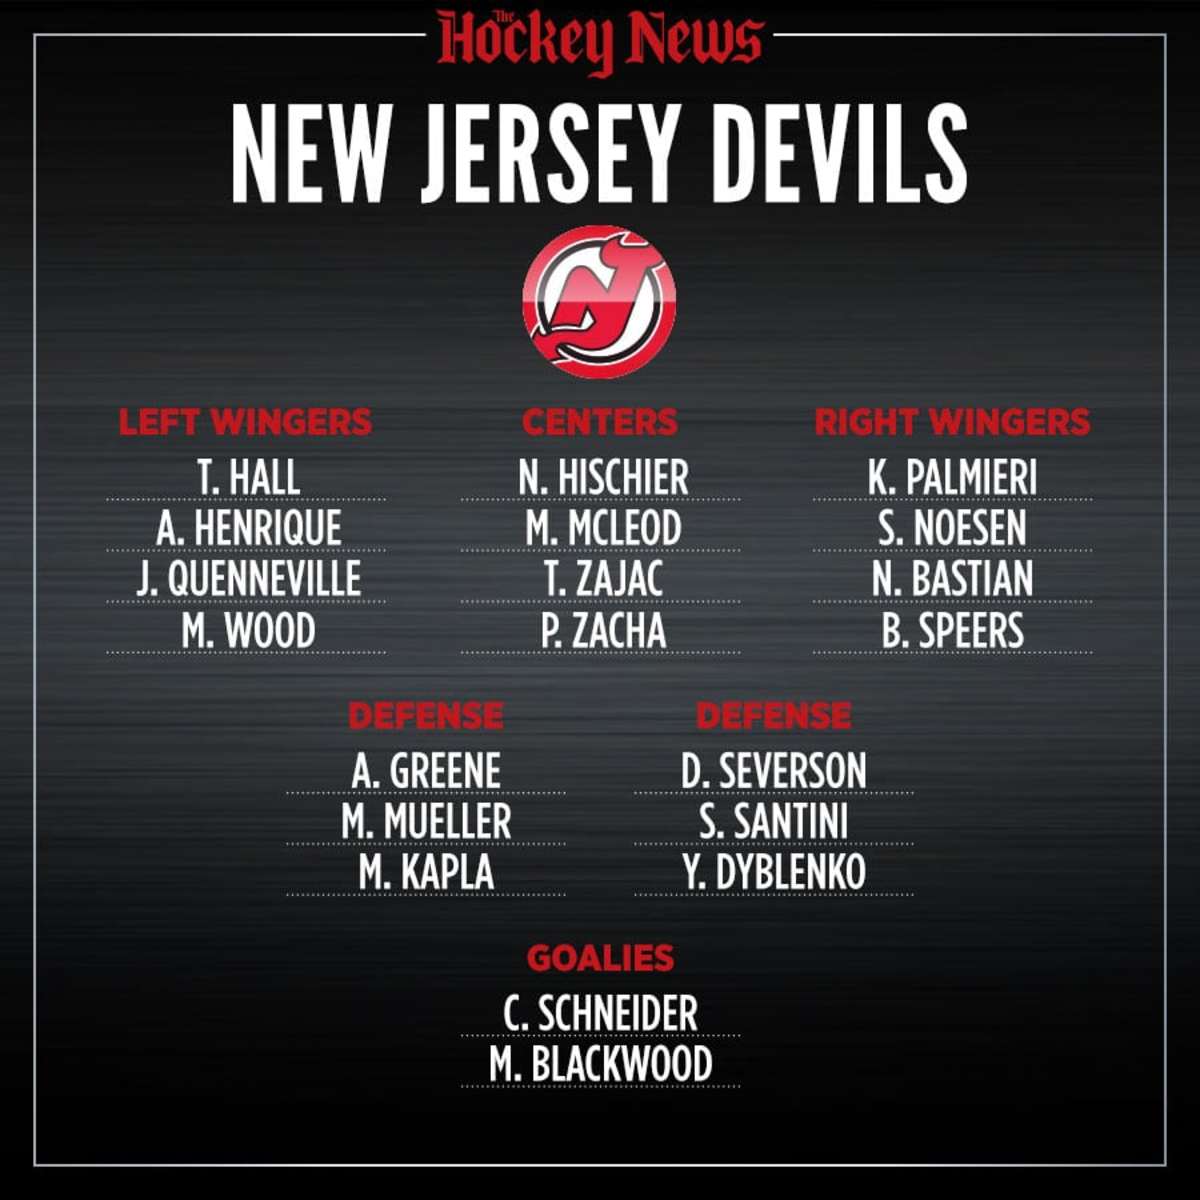 devils new jersey lines